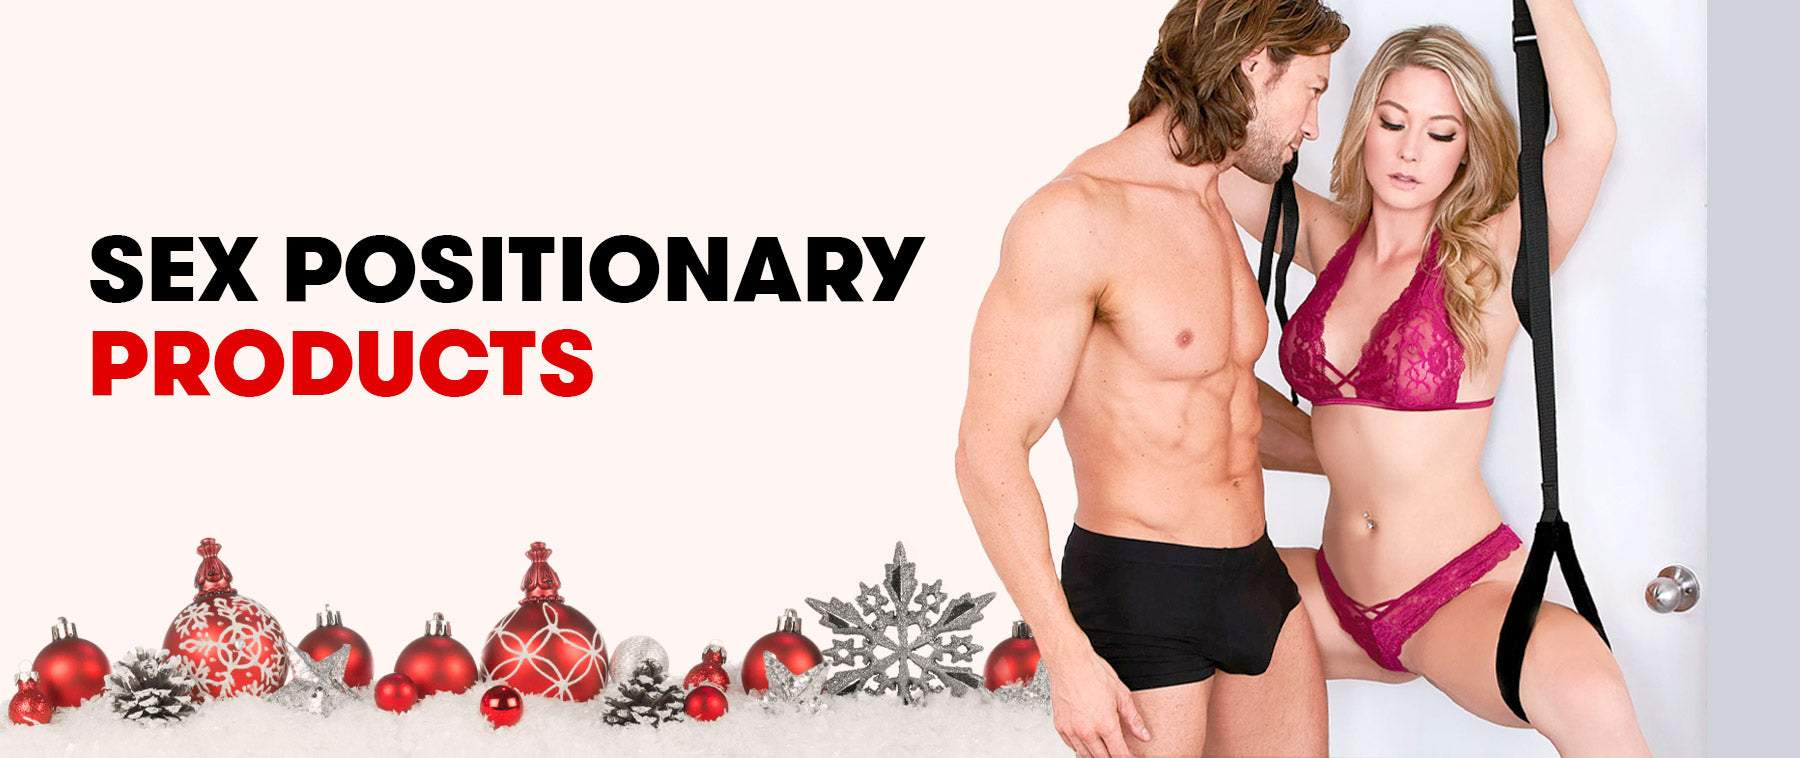 Sex Positionary Products - 14 Kinky Christmas Gifts: Sex Toys, Bondage, Vibrators, Dildos - Blog by Lux Fetish 